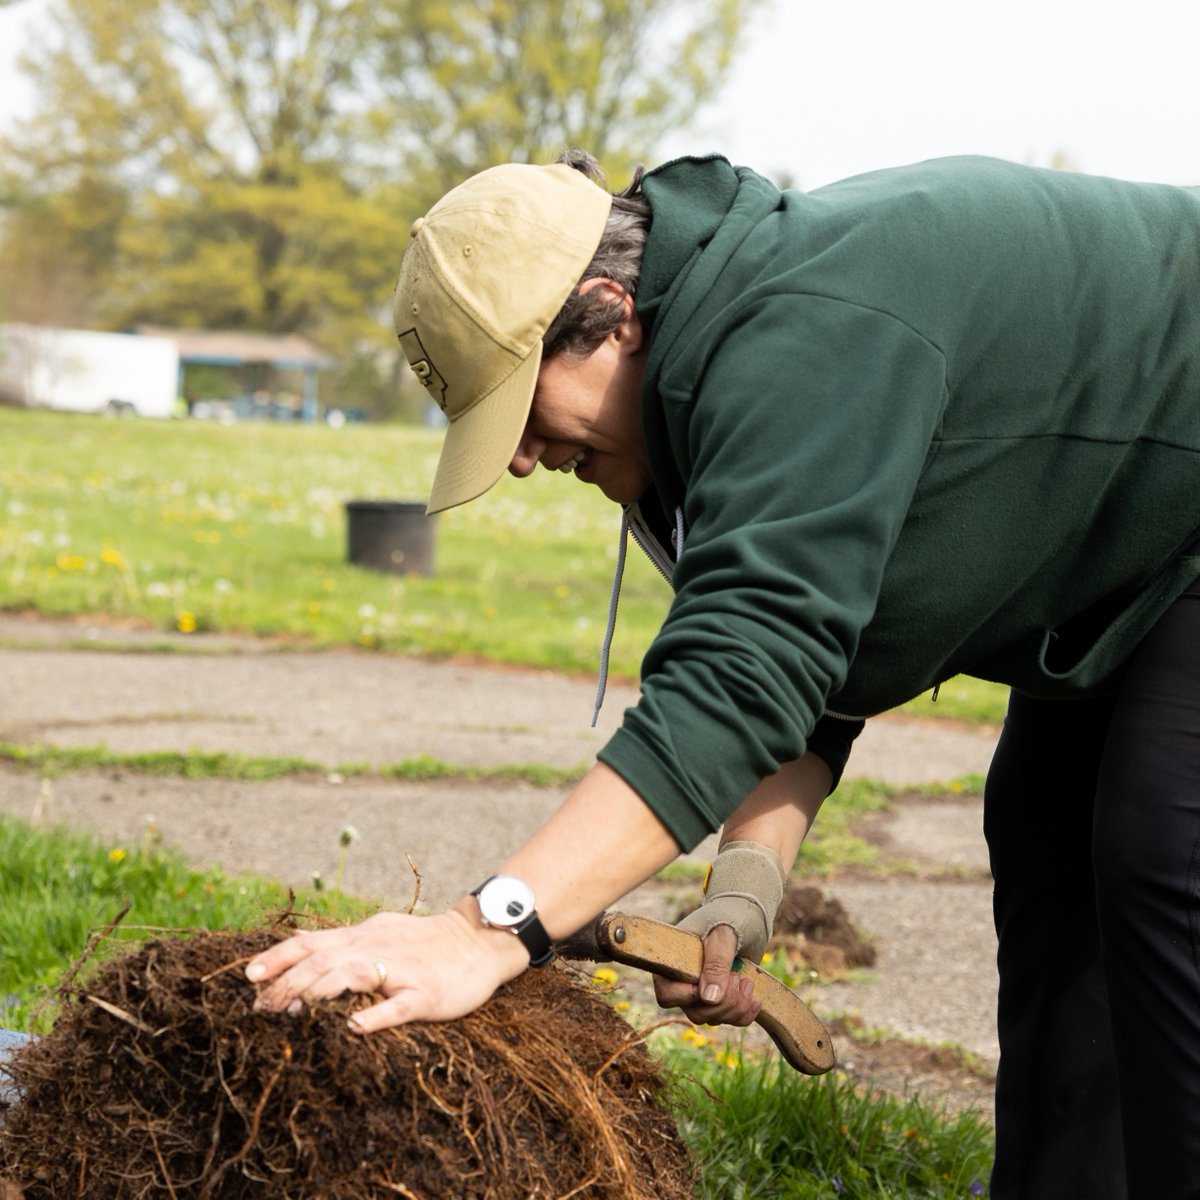 🗓️ Planning your weekend? There's still time to add a KIB tree planting to your calendar! 🌳 Get your hands dirty and make a difference at our Fountain Square Tree Planting on Friday, April 19. Save your spot 👉 bit.ly/3Q8lIBU